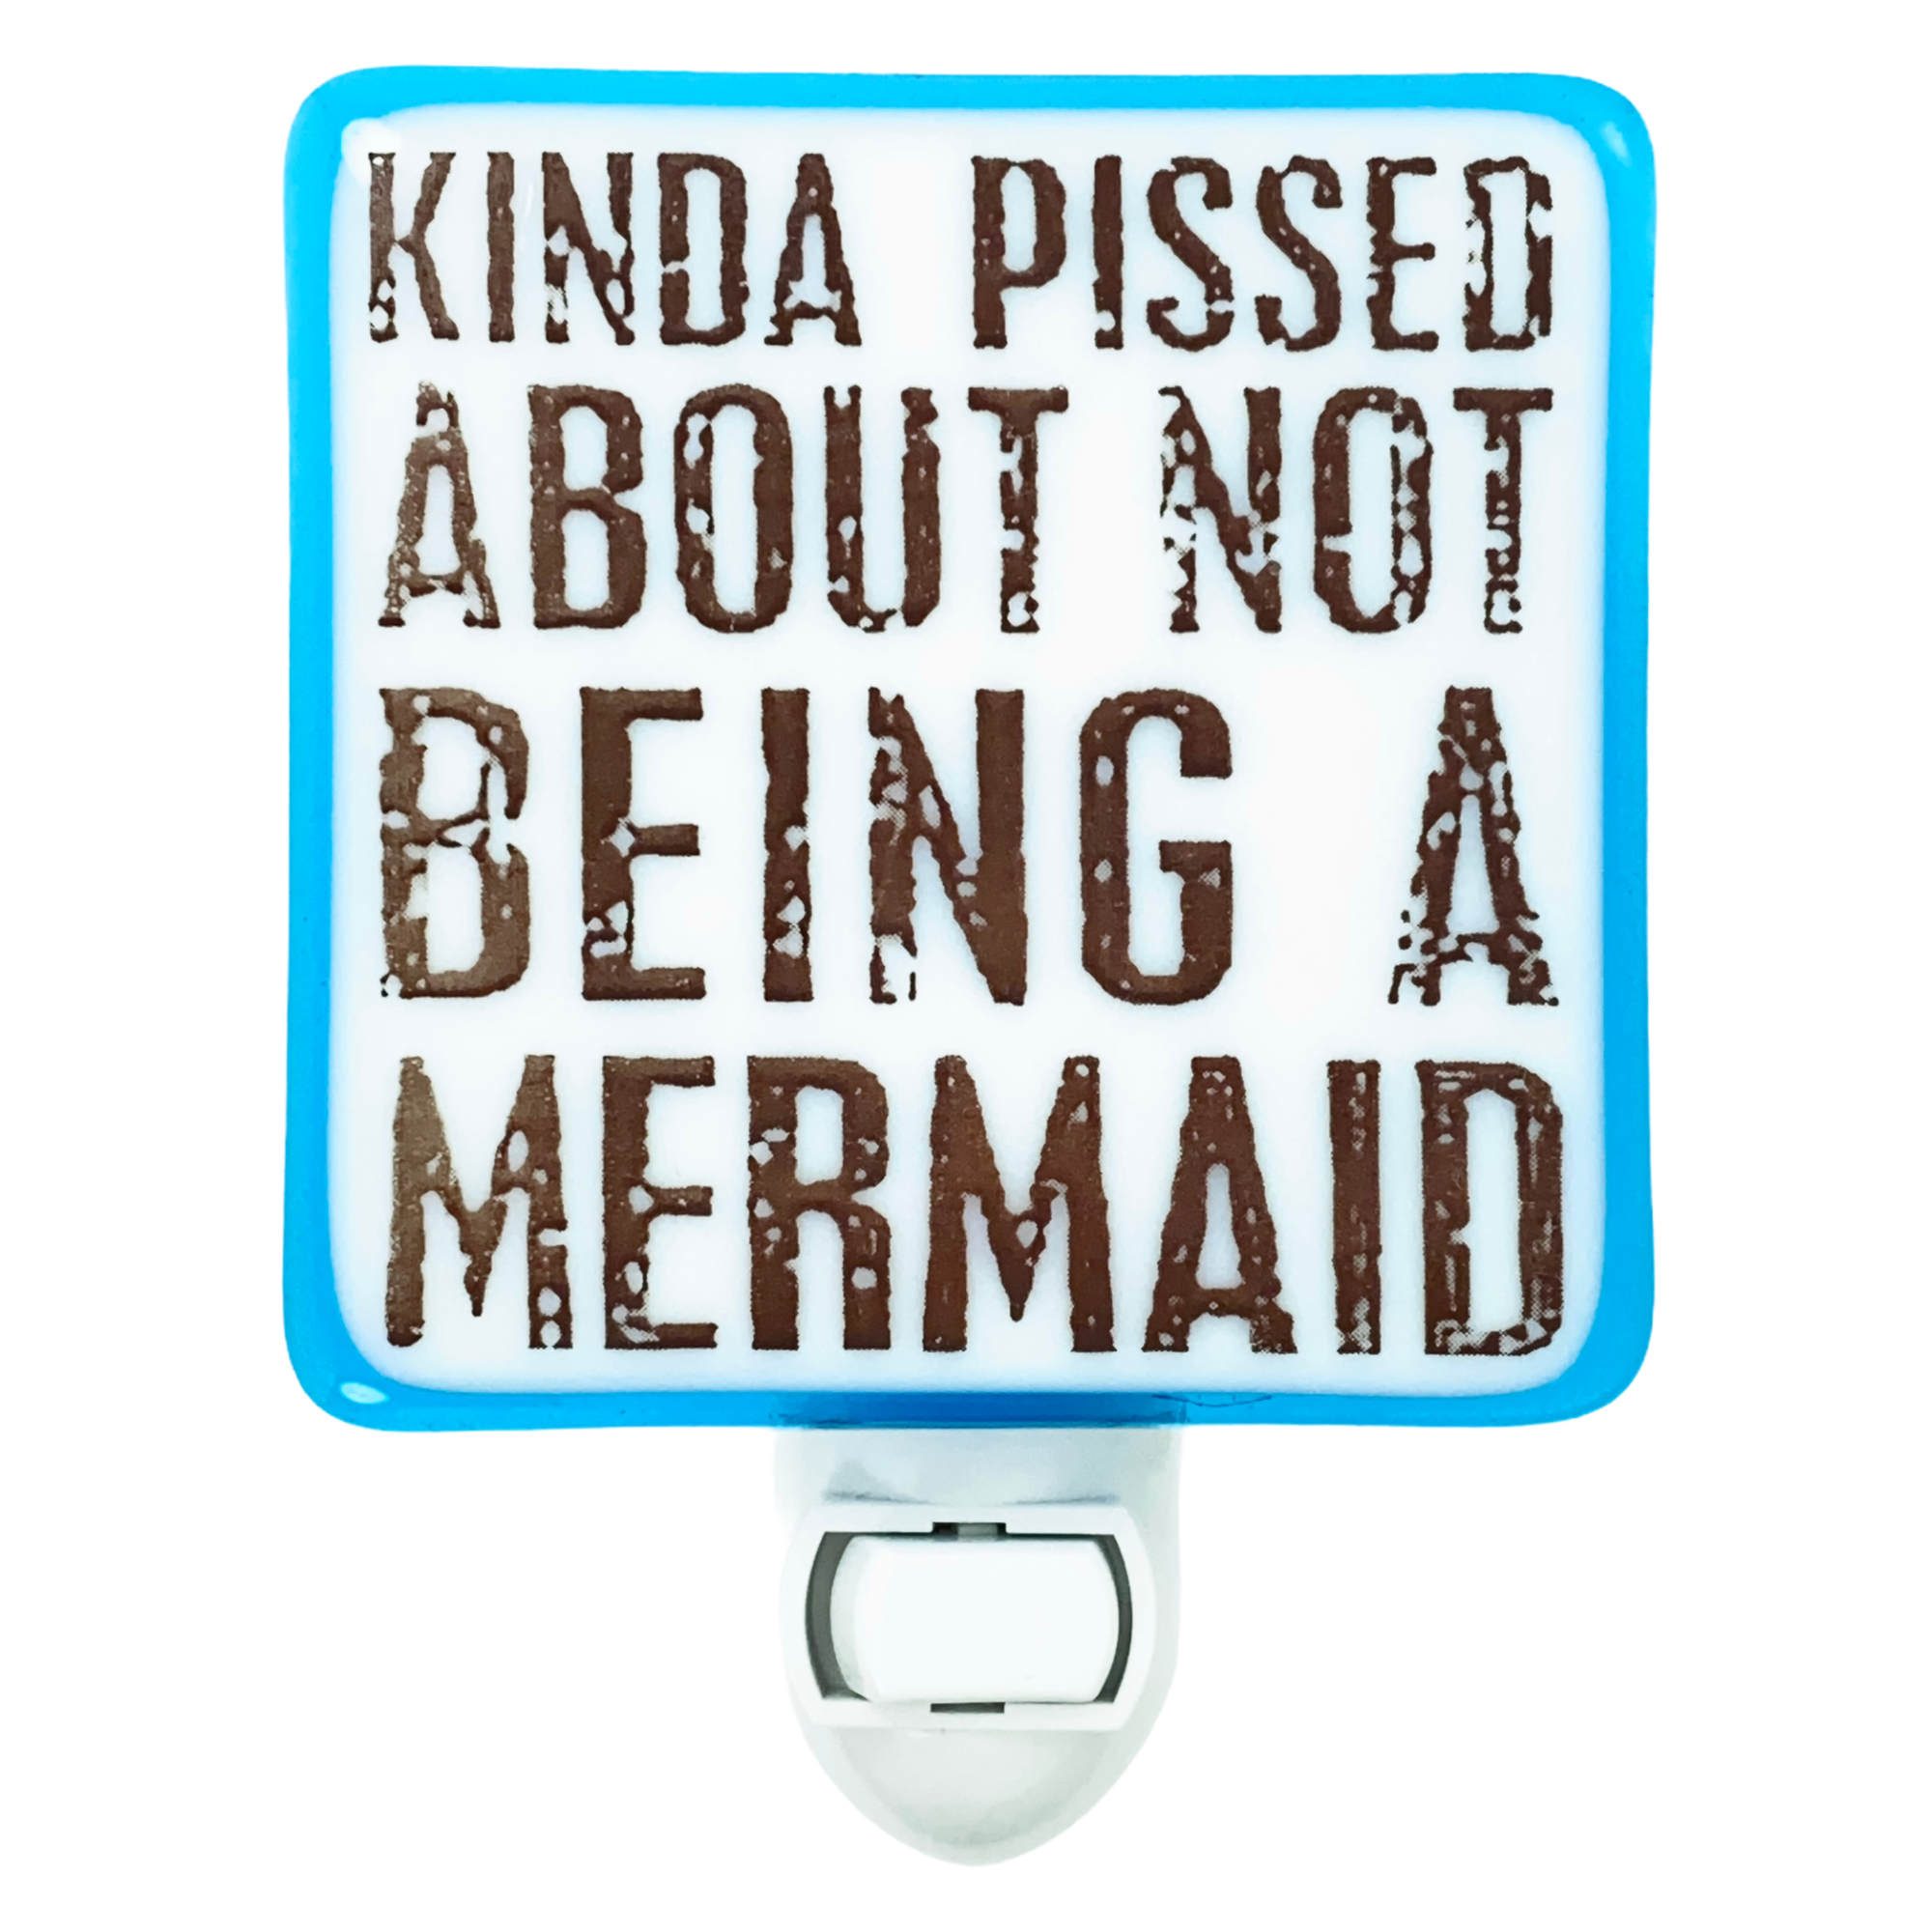 Pissed About Not Being a Mermaid Night Light